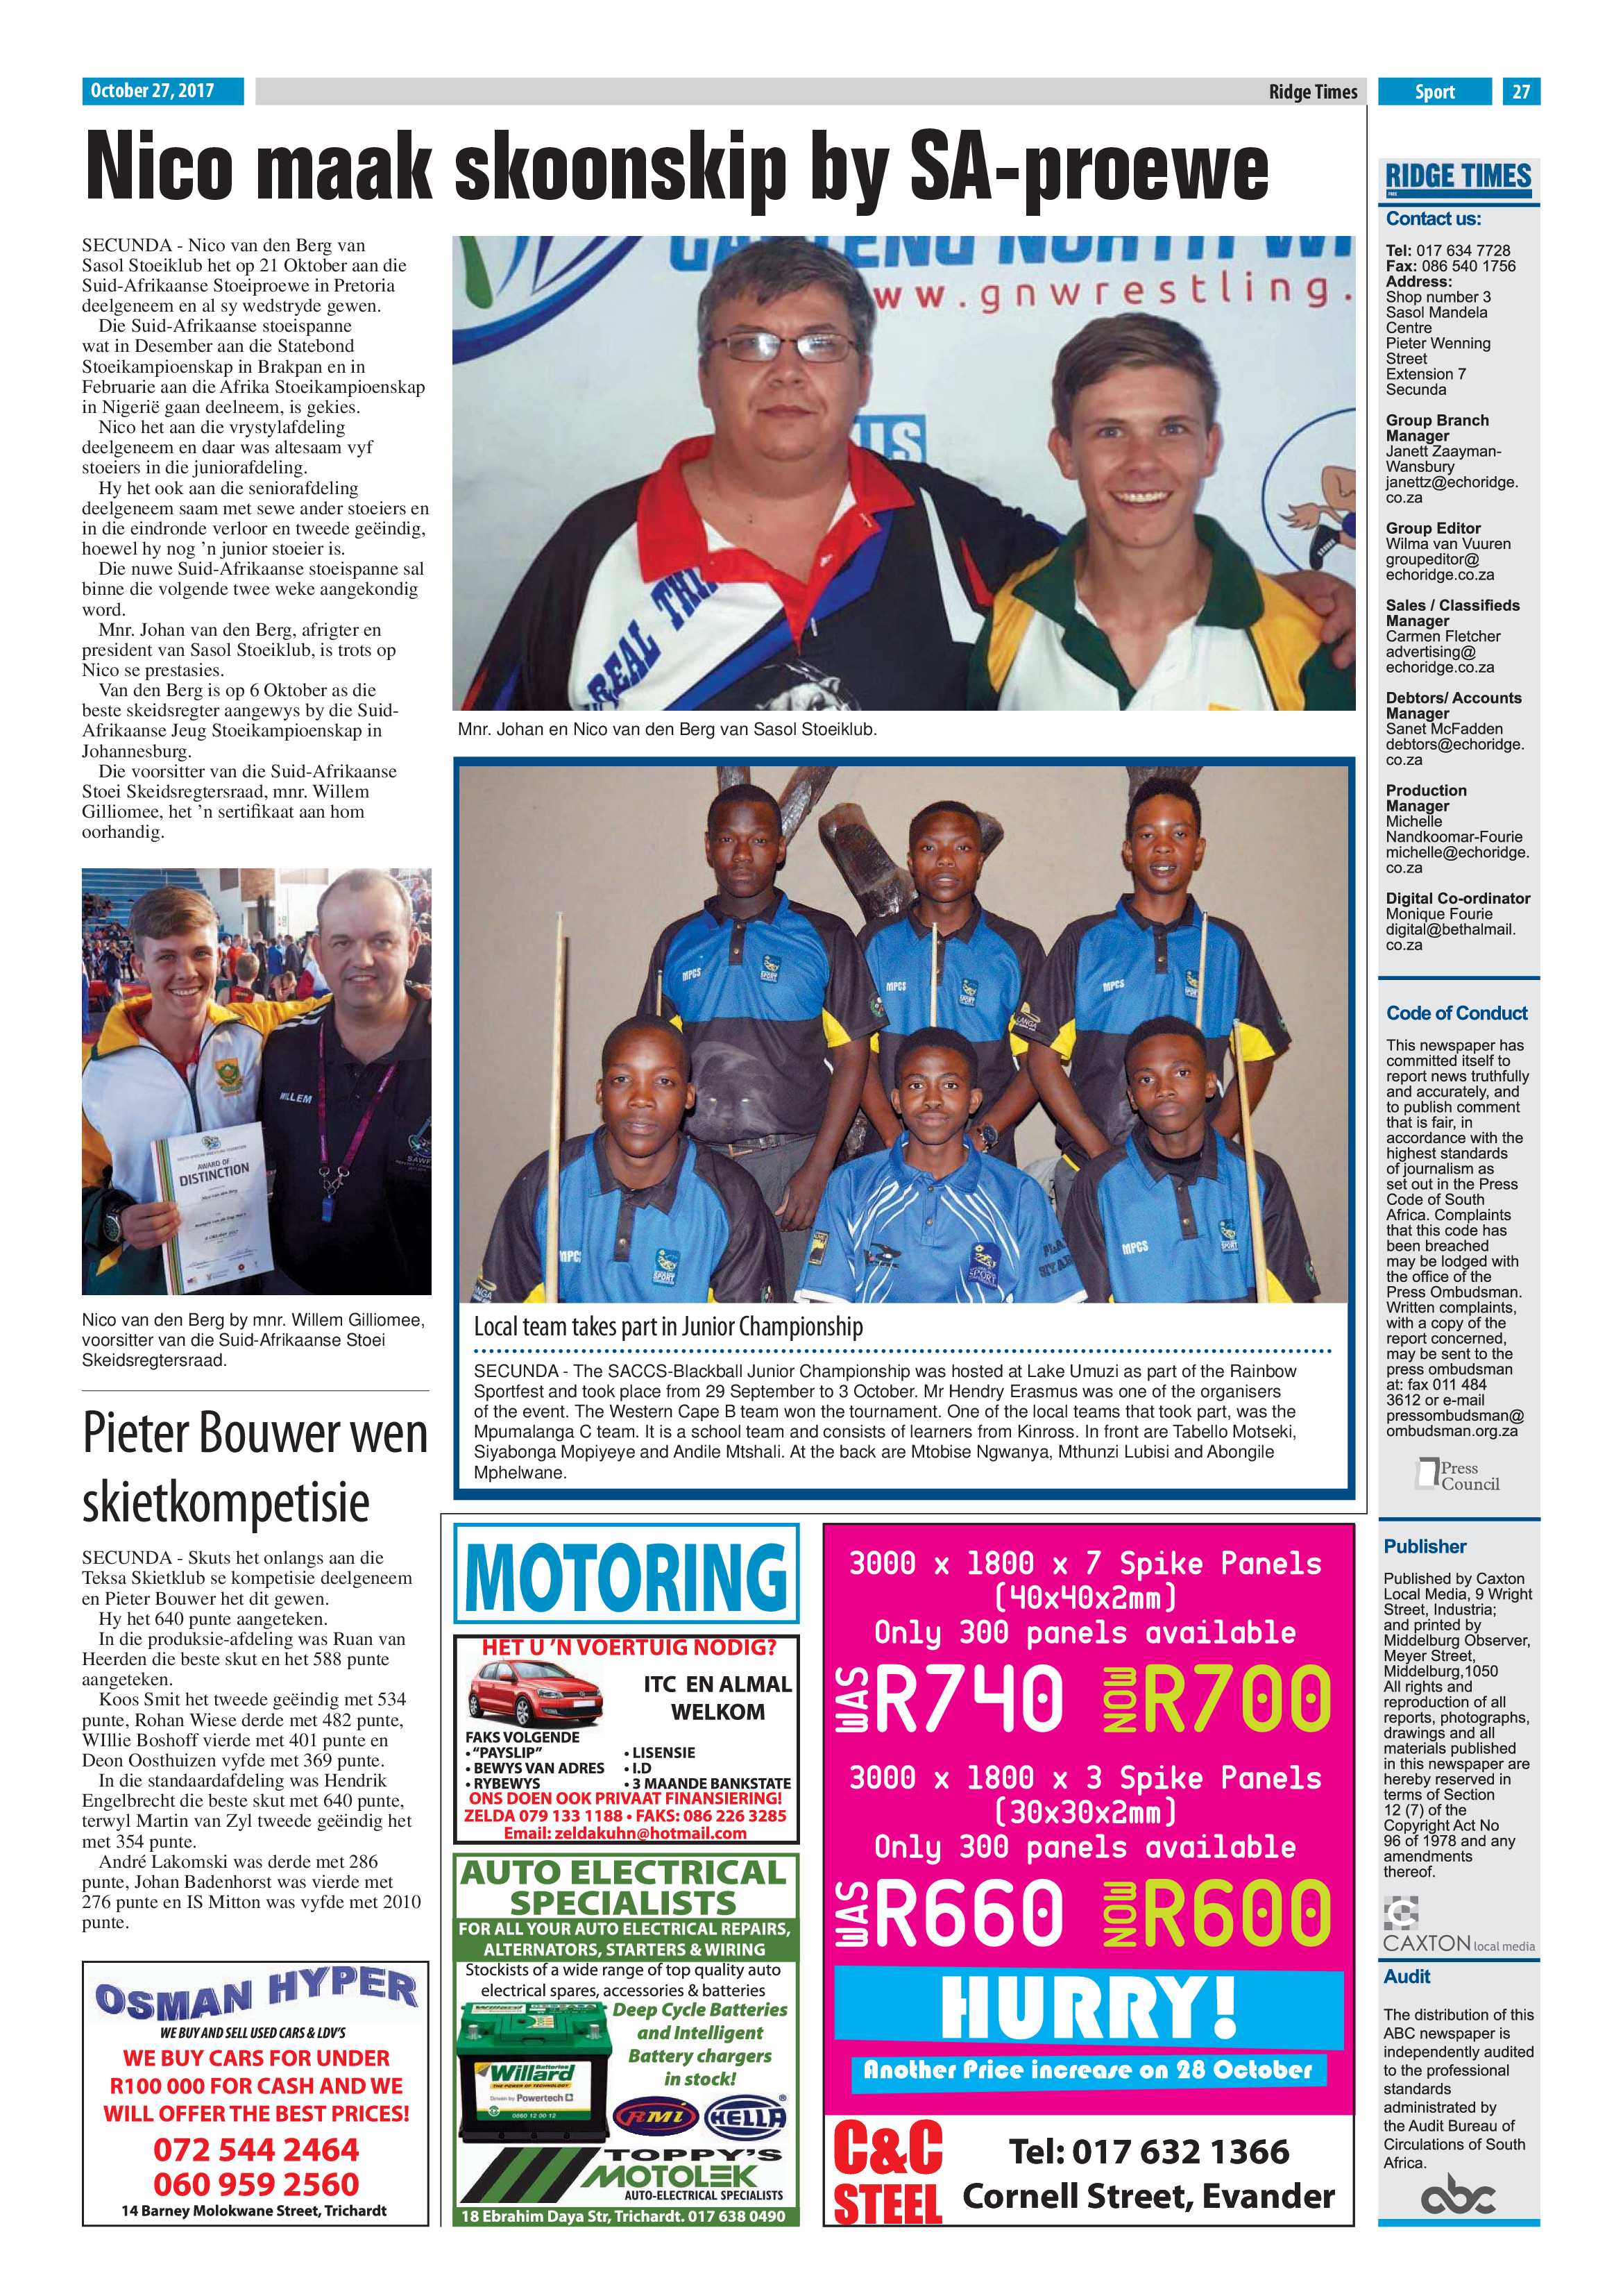 Ridge Times, 27 October 2017 page 27